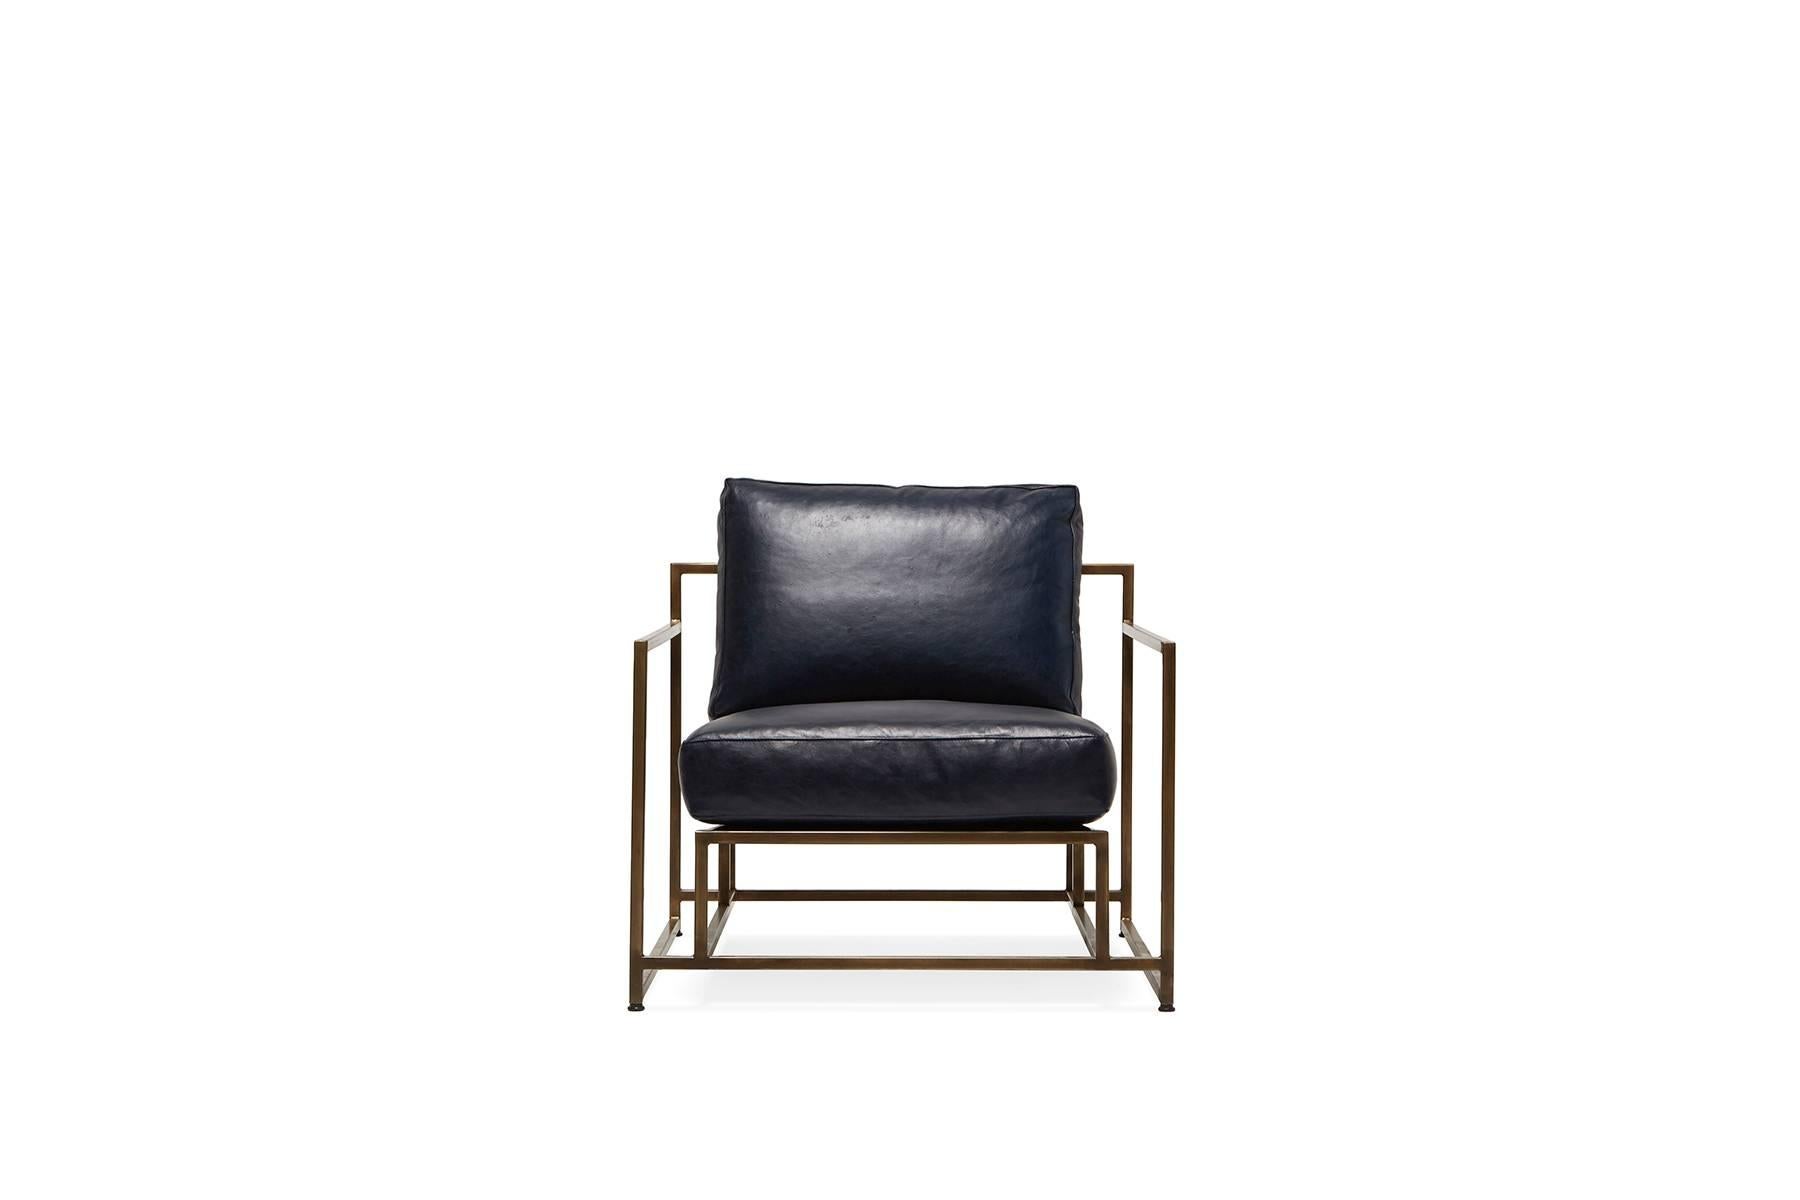 A new chair in our leather series, this version of the Inheritance collection chair has Indigo leather upholstery atop an antique brass frame with natural cotton webbing, matching Indigo leather belts, and antique brass buckles

This item is made